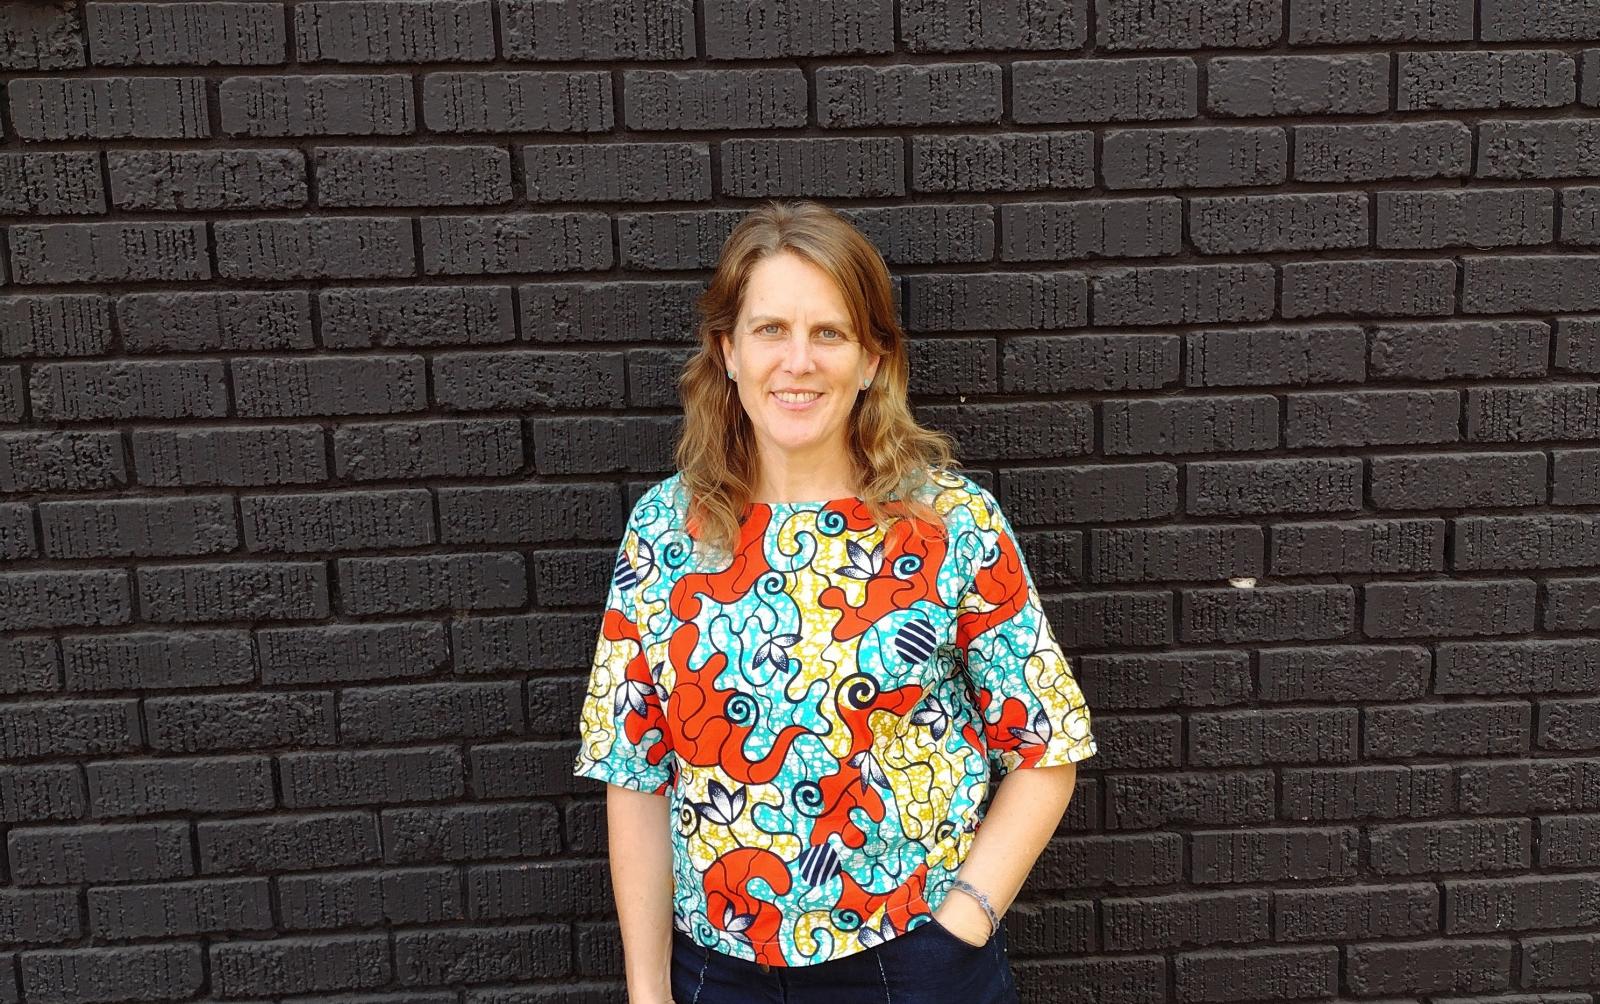 Photo of Amanda Hickman, wearing a brightly colored shirt, standing in front of a black brick wall